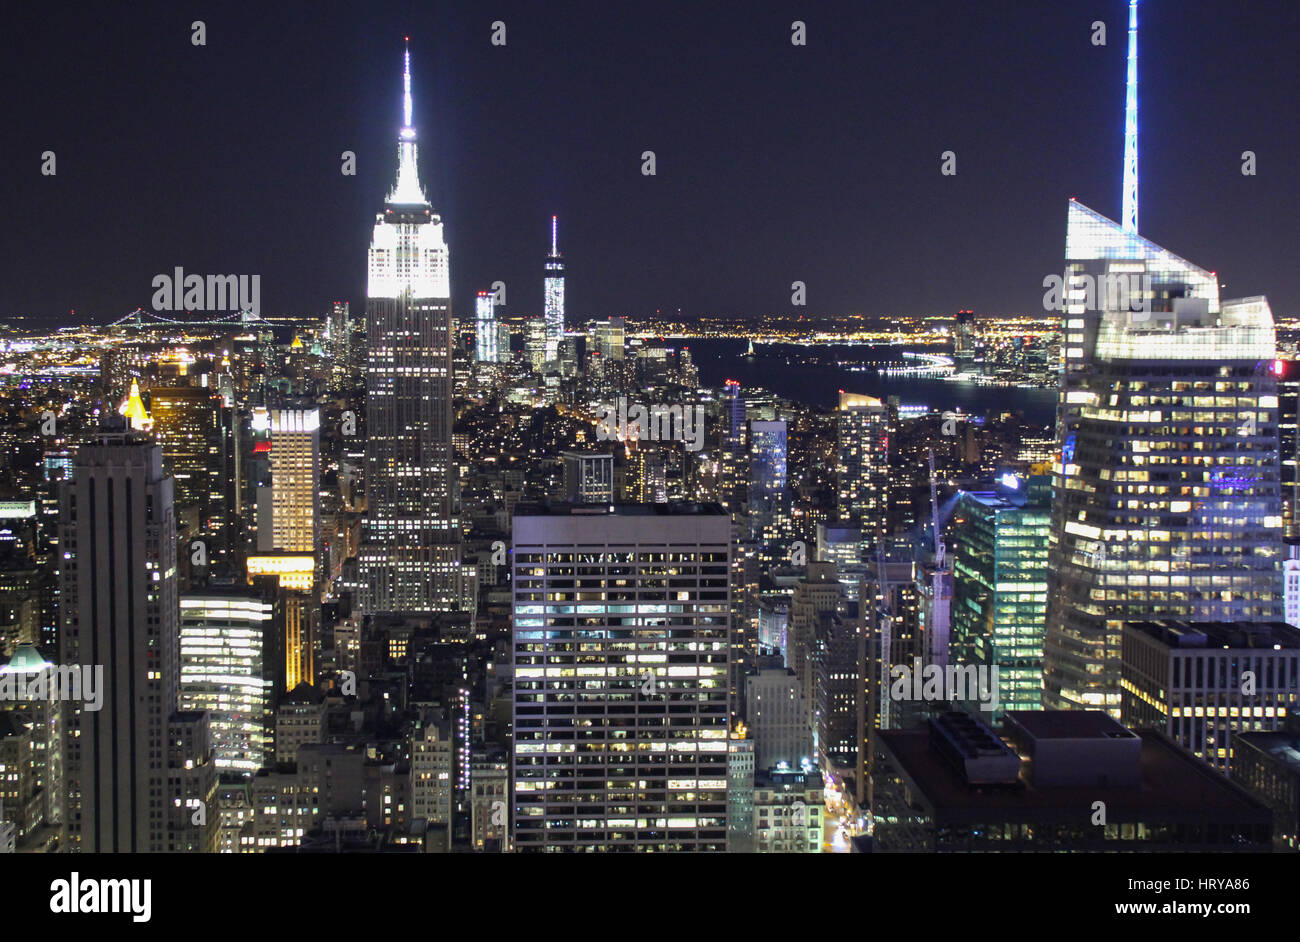 NEW YORK, USA - April 27 2014: The Empire State Building in the skyline of New York at night. Stock Photo